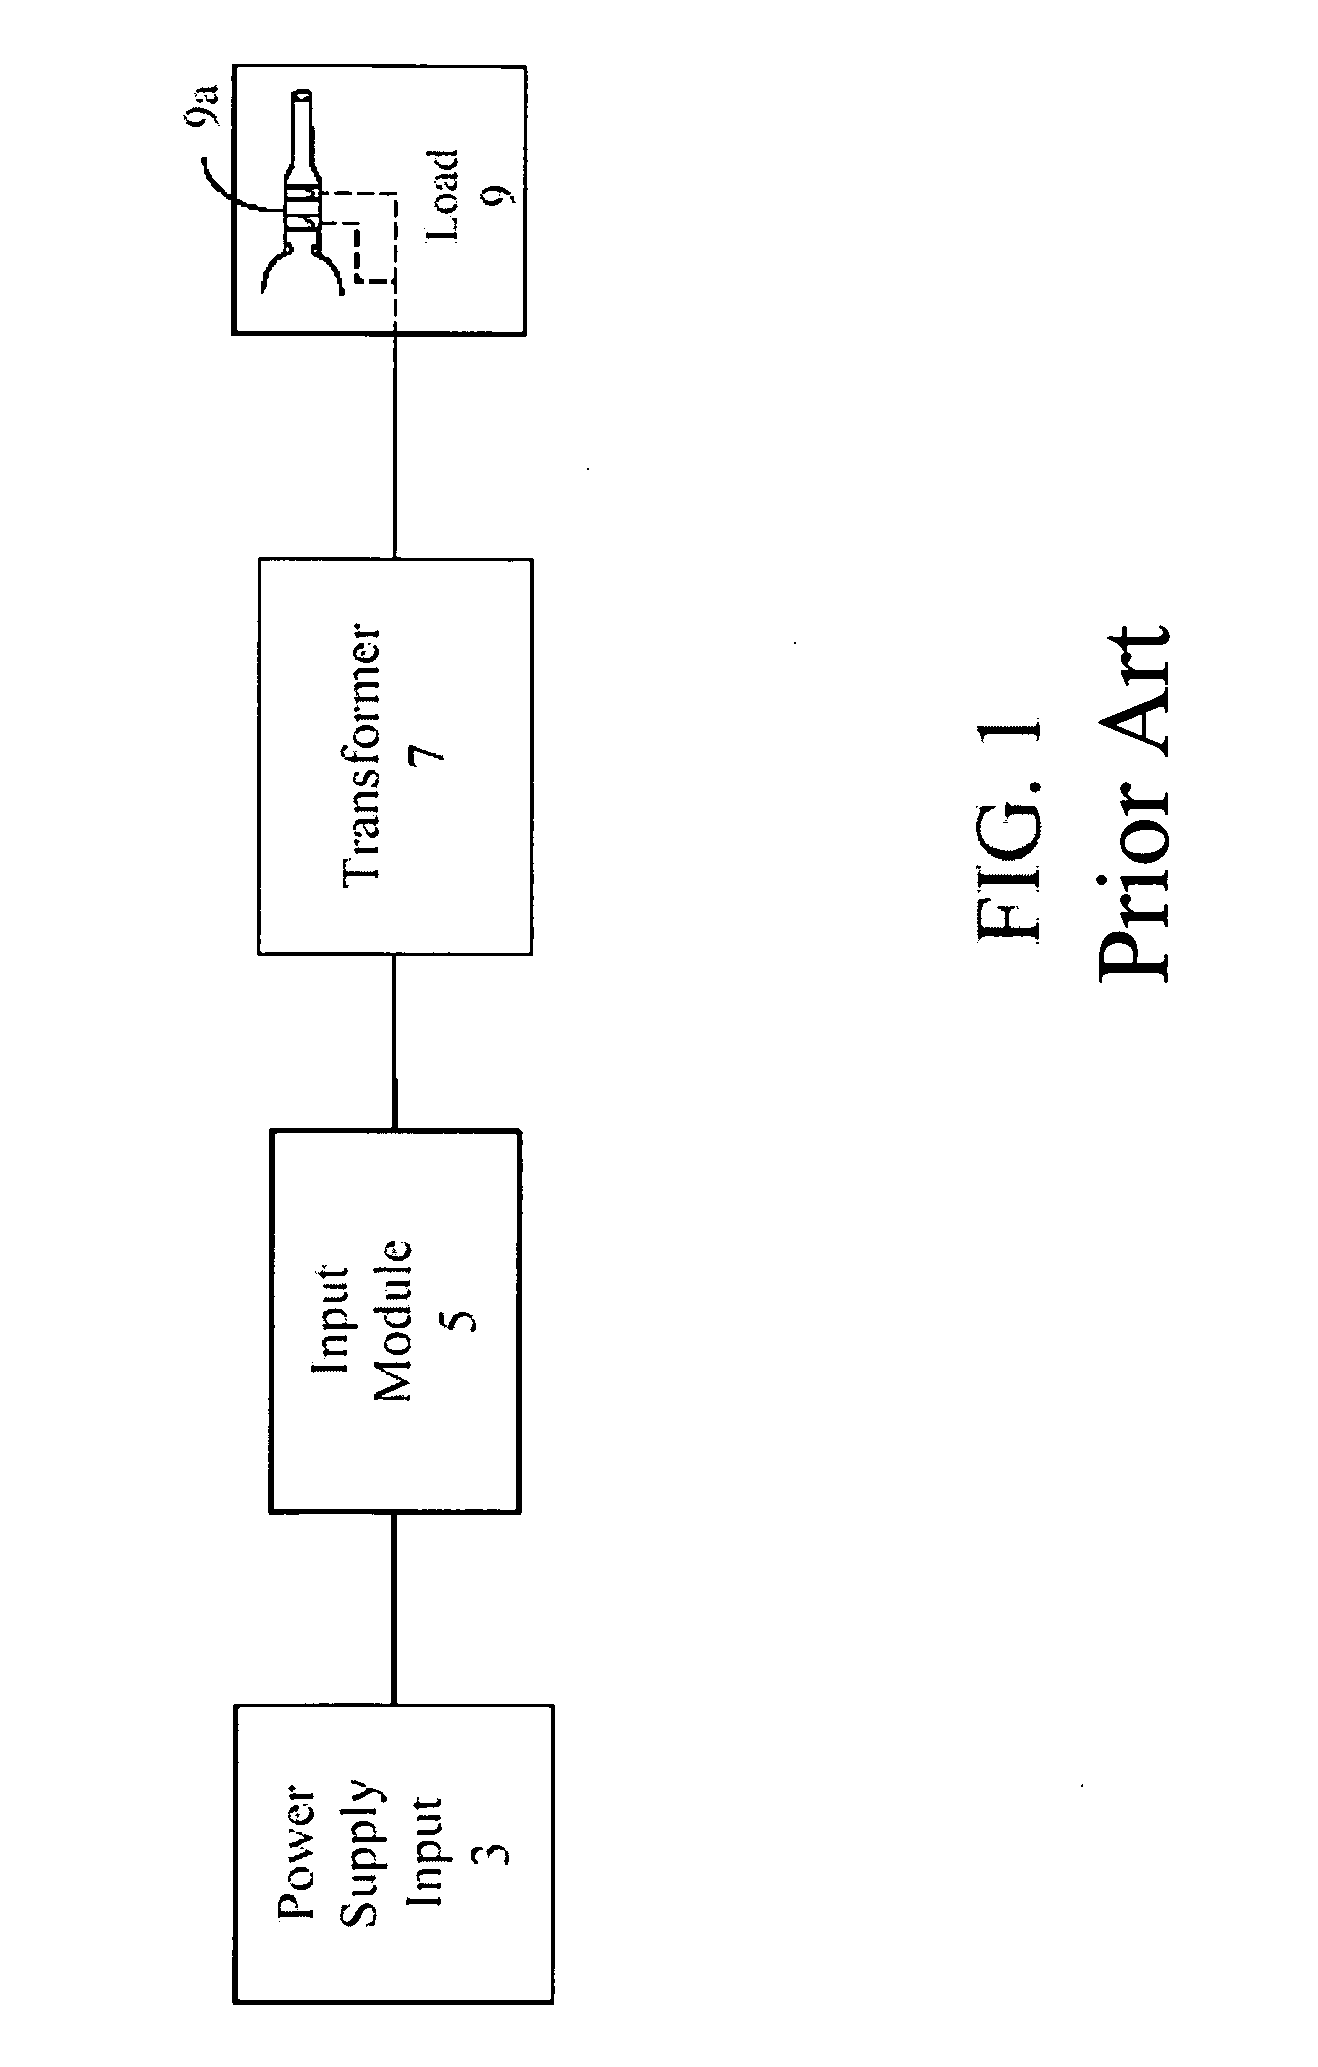 Method and system for providing current leveling capability